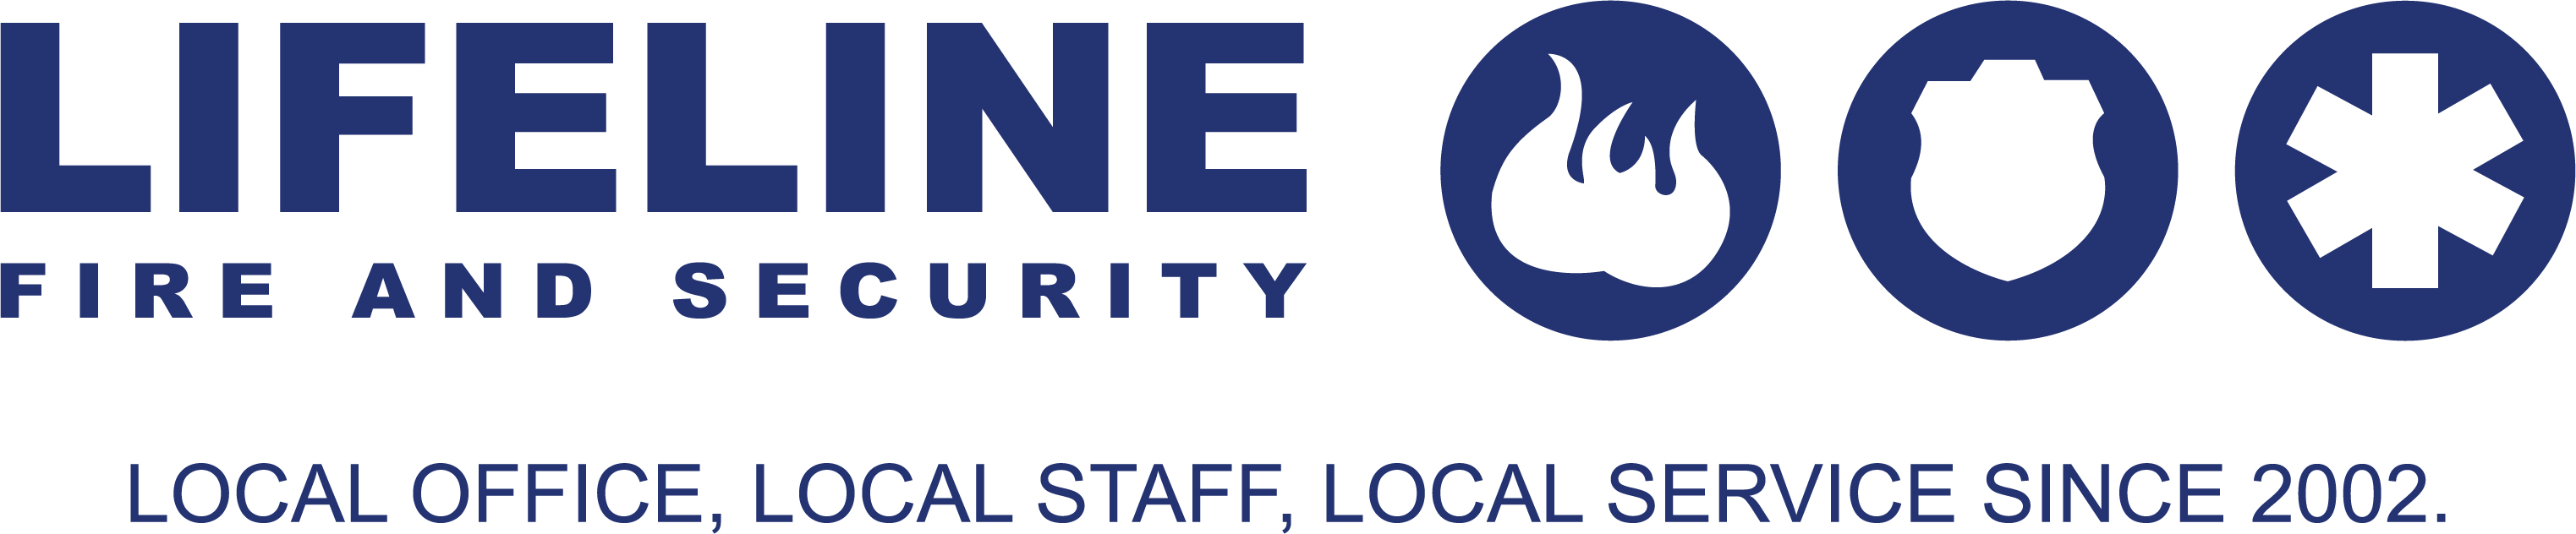 Lifeline Fire and Security